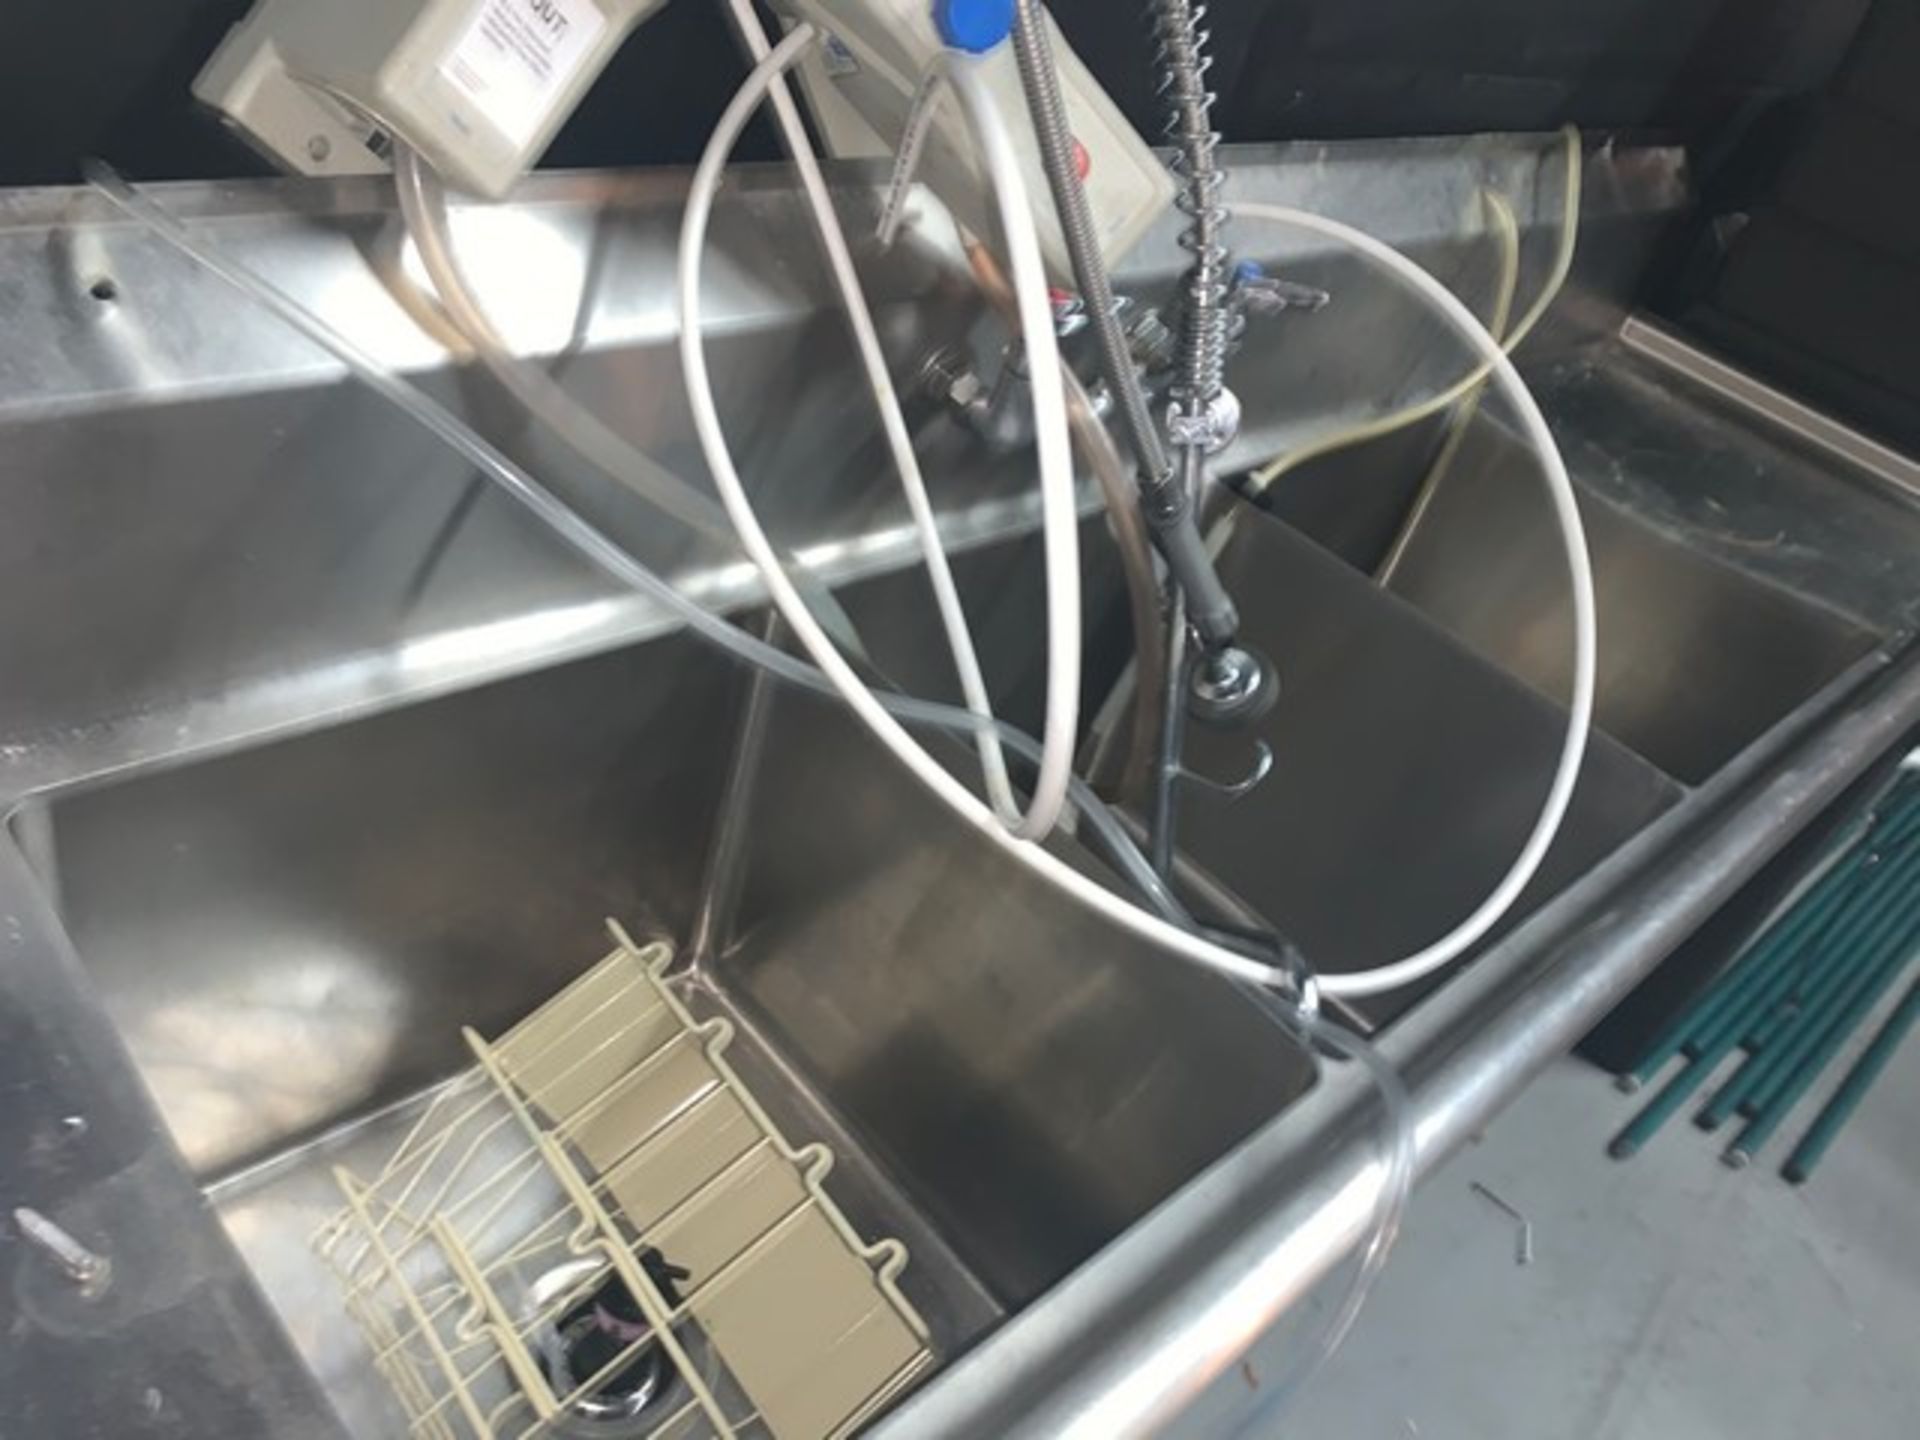 3-HOLE STAINLESS STEEL SINK WITH ECOLAB SOAP SYSTEM & PRESSURE NOZZLE - Image 2 of 2